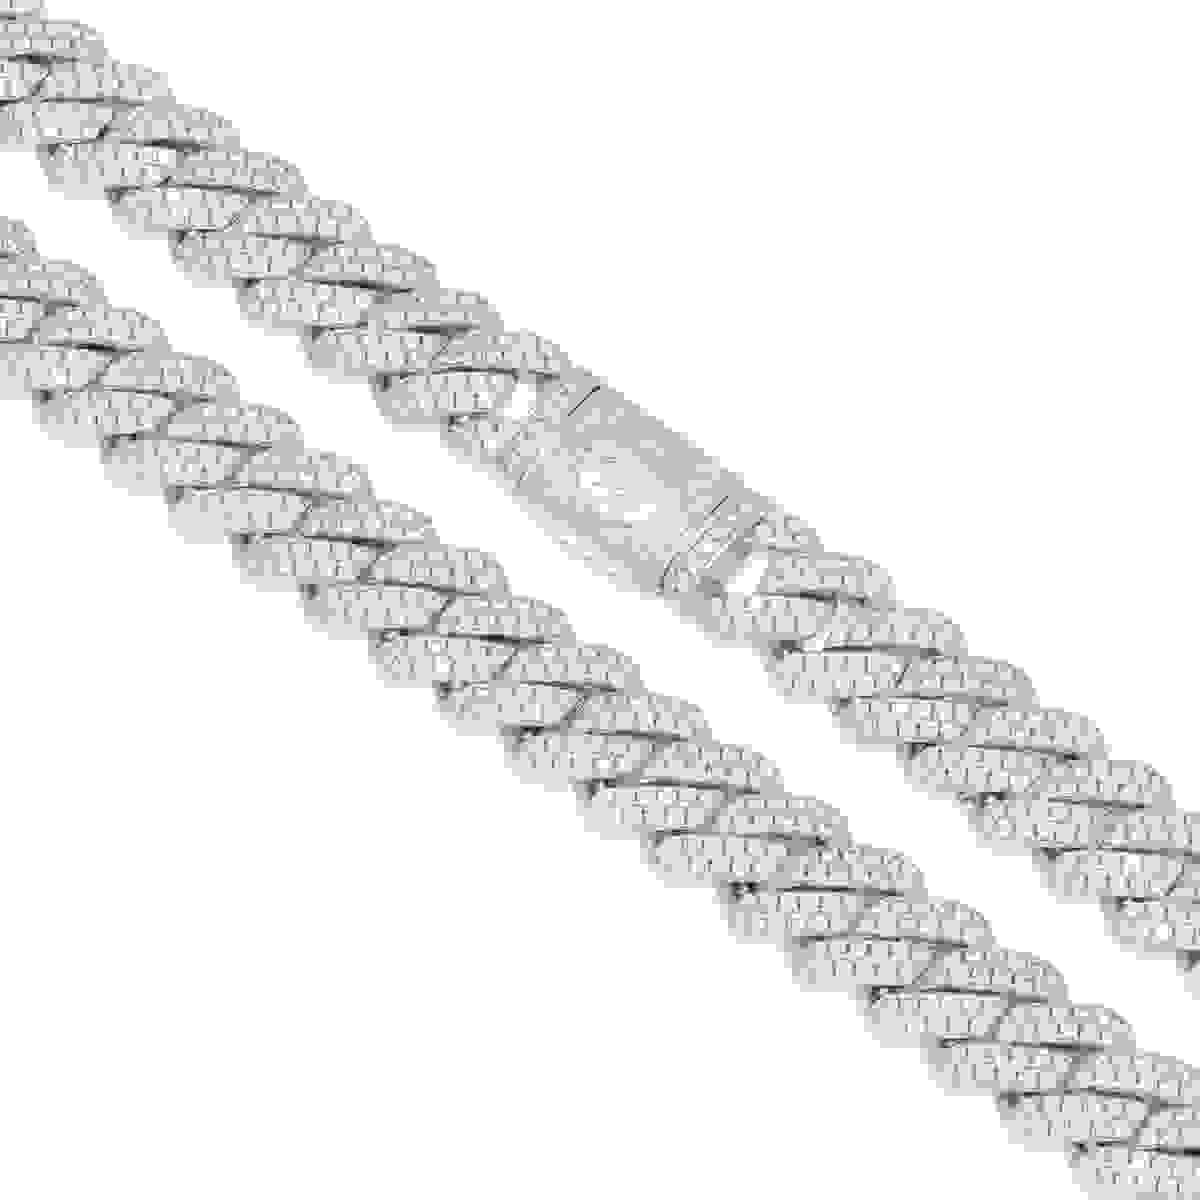 King Ice White Gold Plated 12mm Iced Miami Cuban Chain CHX14105 22”